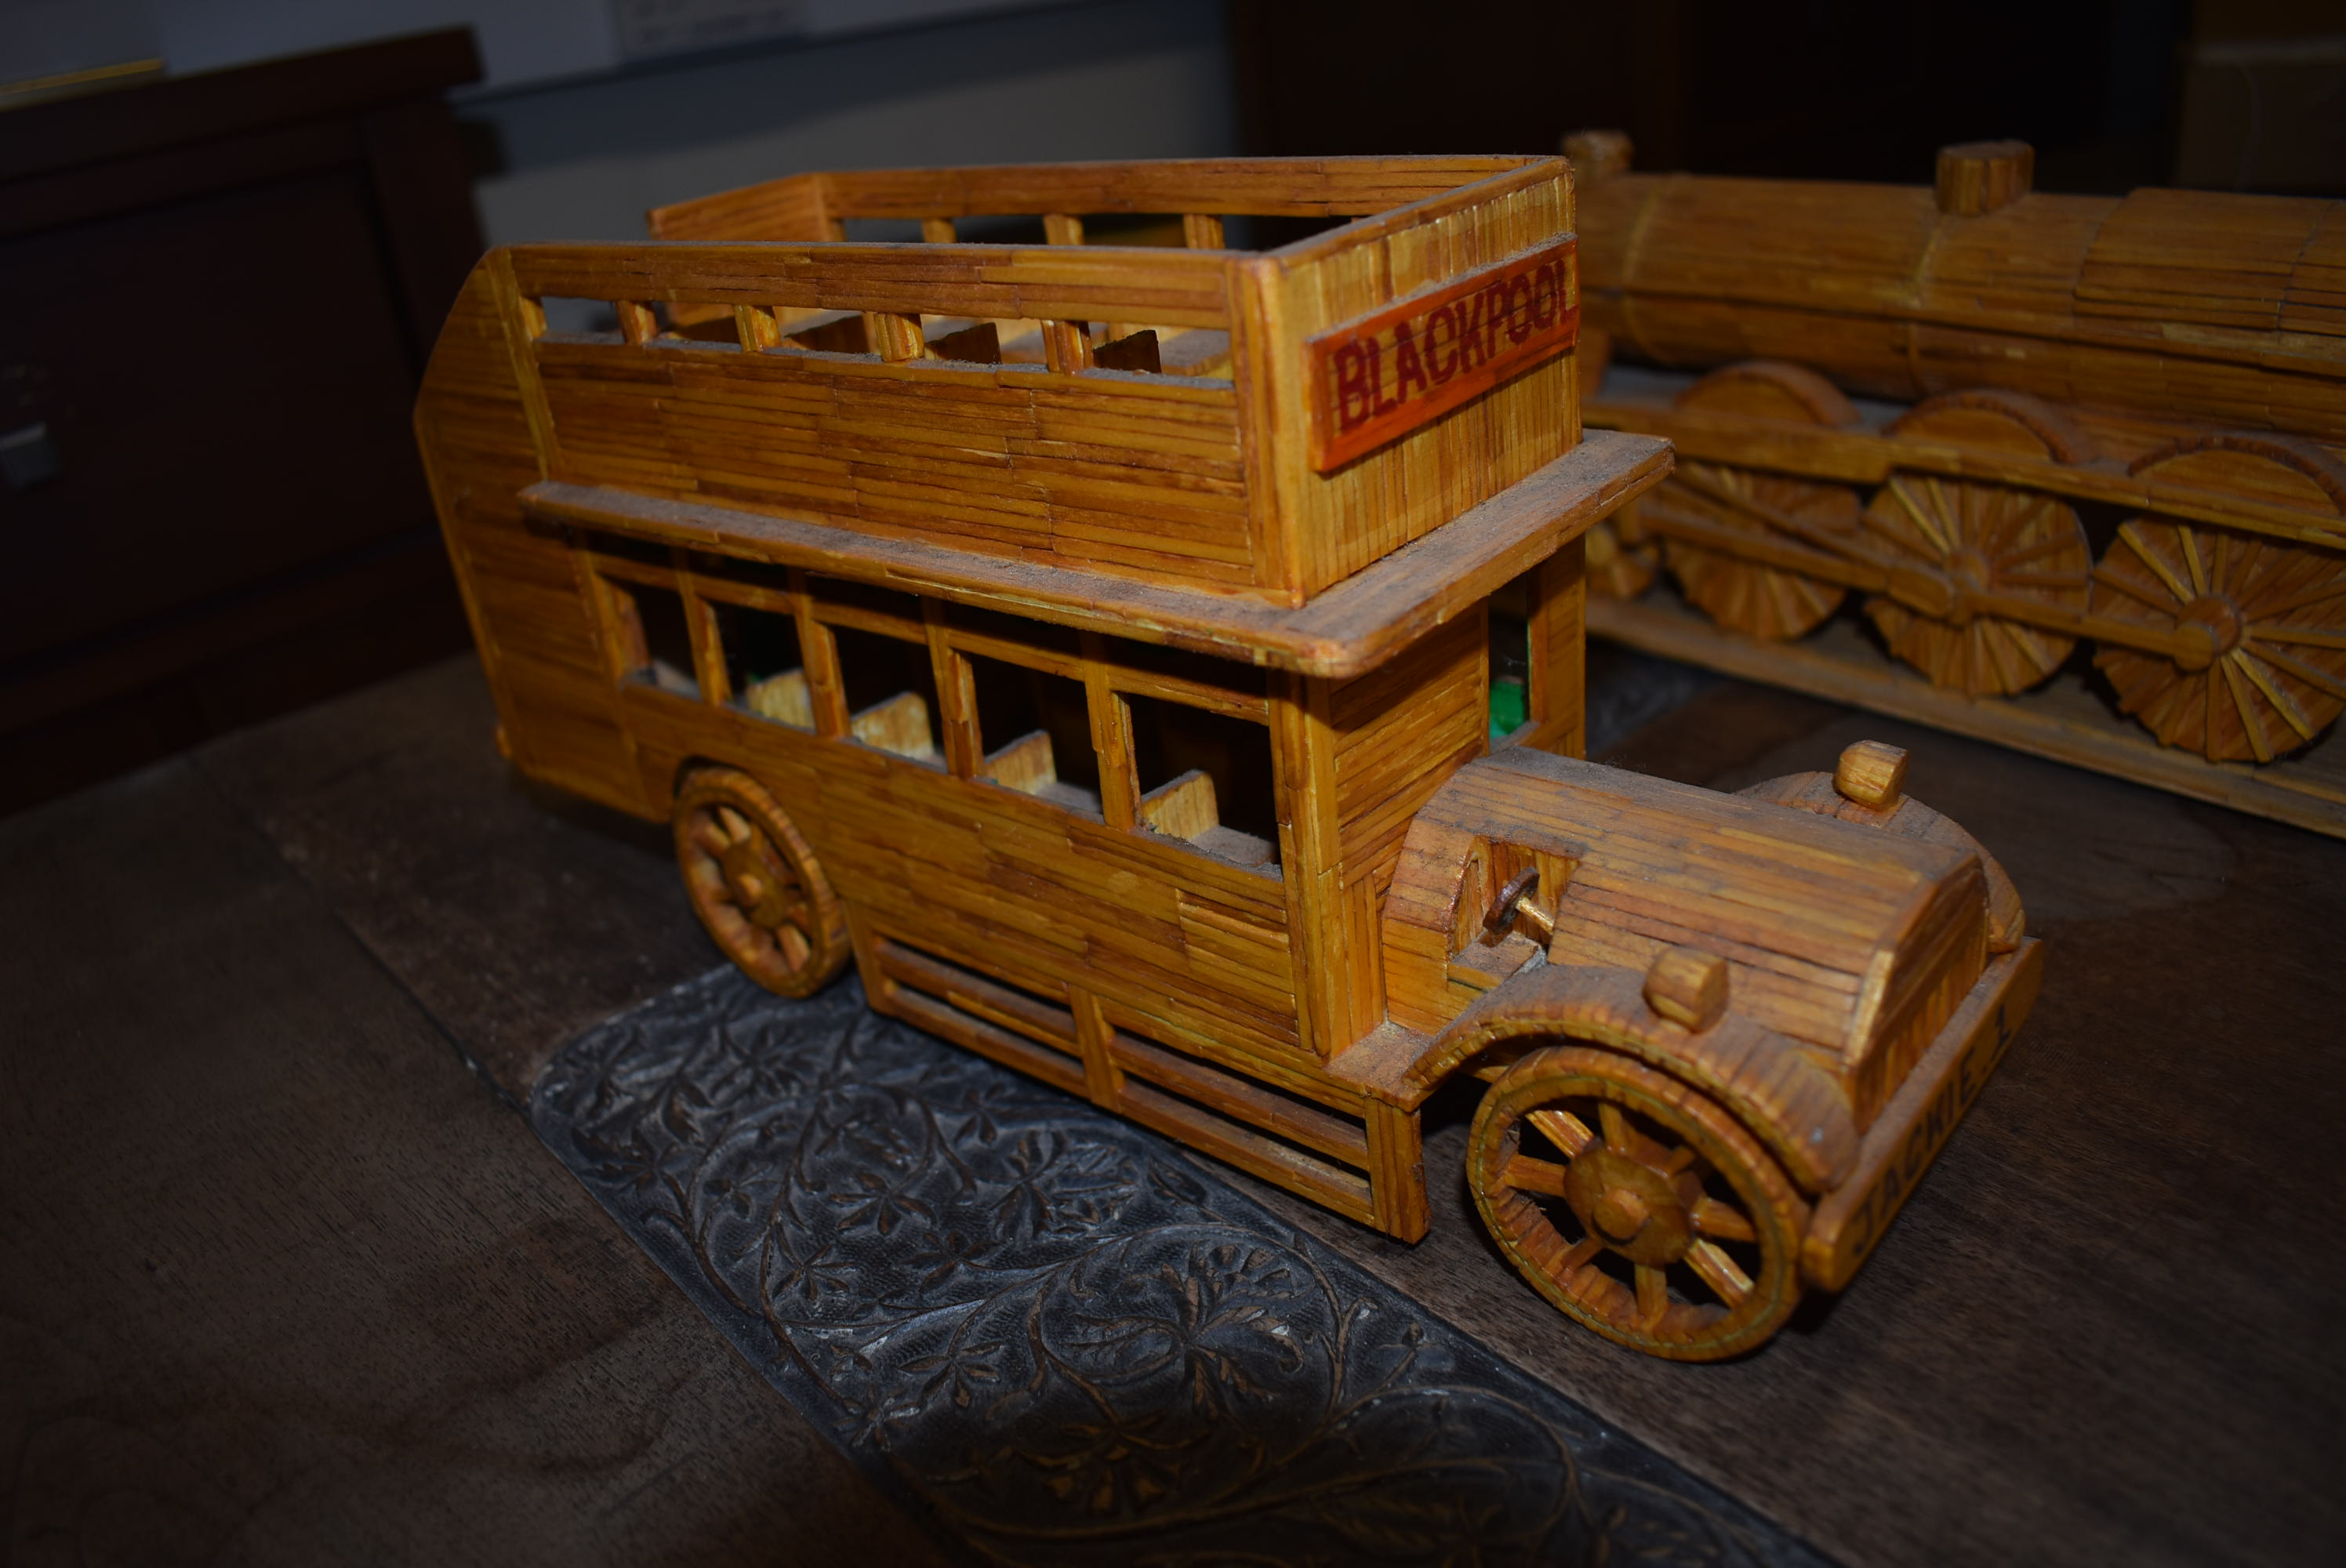 Three Handmade Matchstick Models; Vintage Car, Bus, and Steam Train - Image 5 of 12